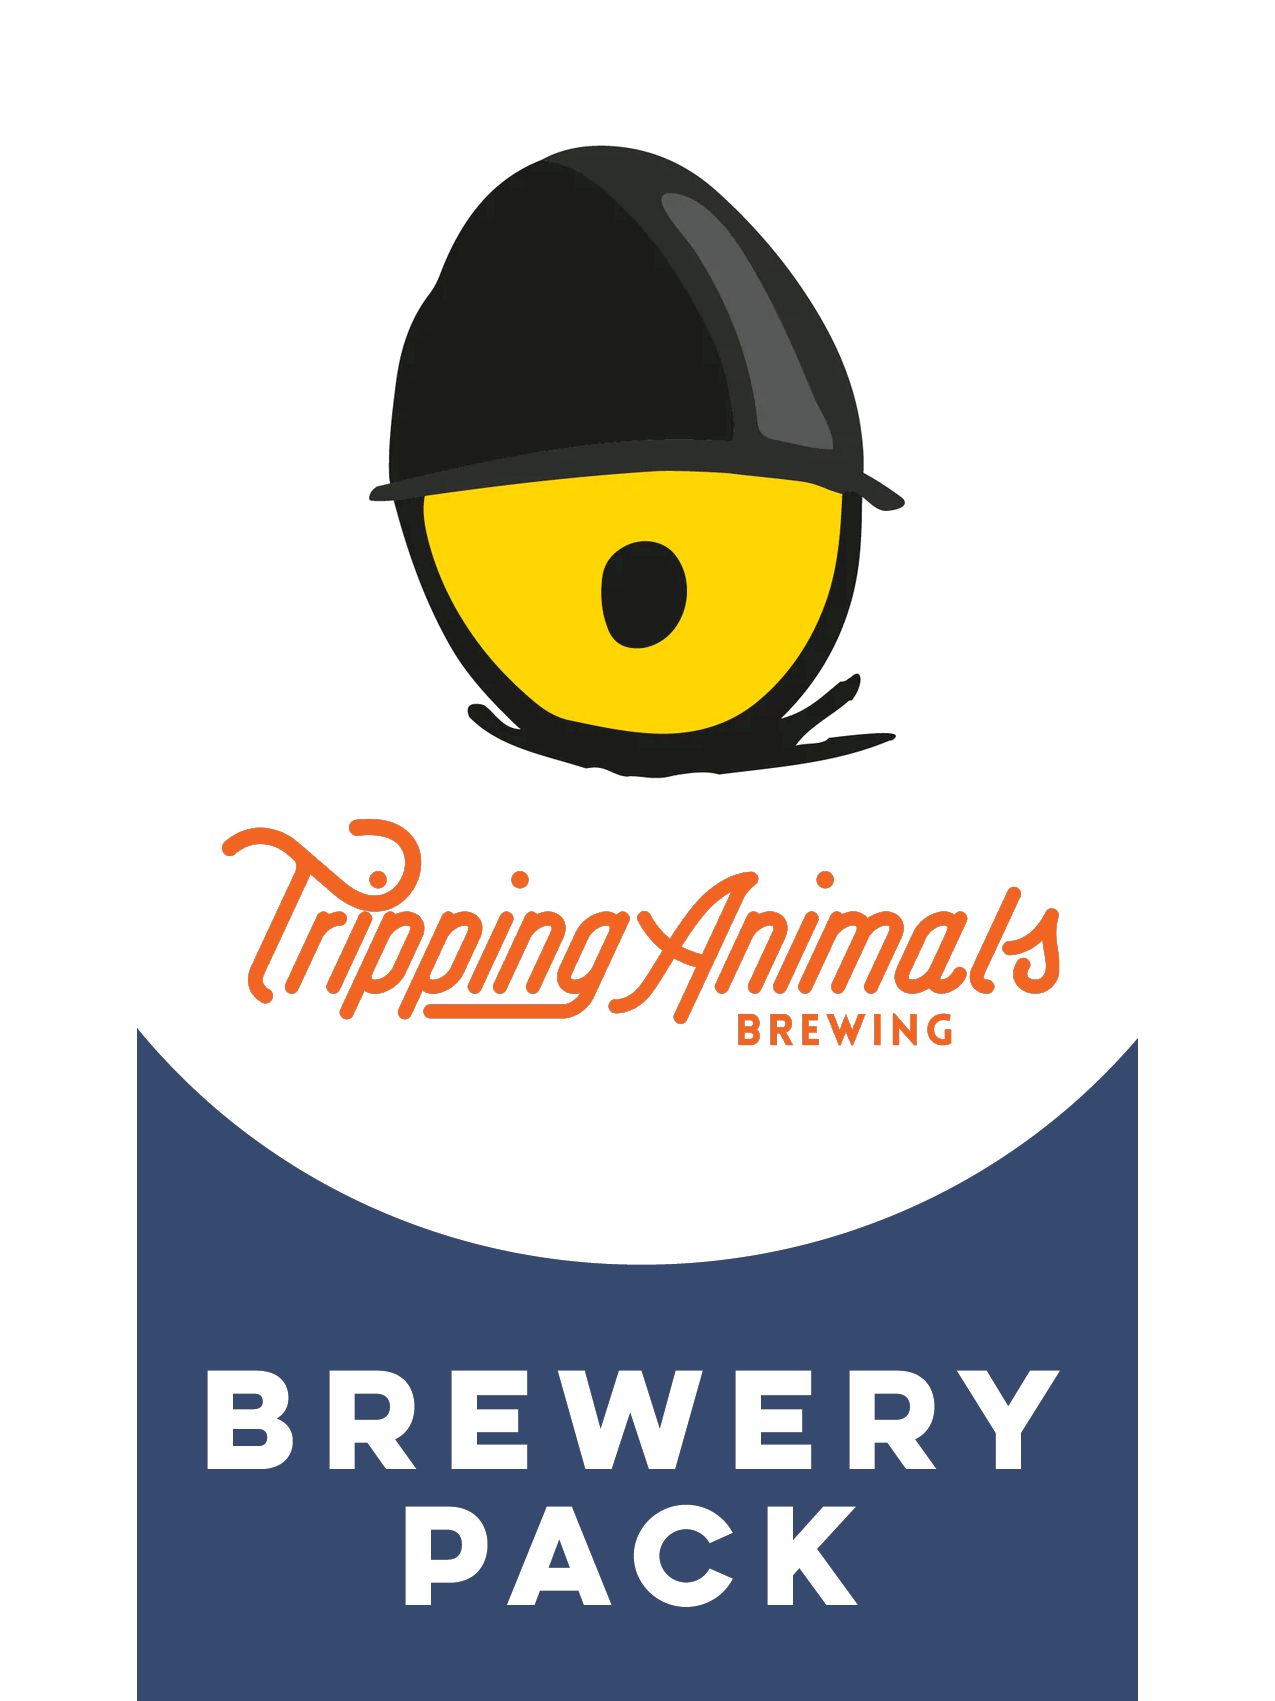 -Tripping Animals- Tripping Animals Brewery Pack-Packs & Cases- Only @ Beer Republic - The best online beer store for American & Canadian craft beer - Buy beer online from the USA and Canada - Bier online kopen - Amerikaans bier kopen - Craft beer store - Craft beer kopen - Amerikanisch bier kaufen - Bier online kaufen - Acheter biere online - IPA - Stout - Porter - New England IPA - Hazy IPA - Imperial Stout - Barrel Aged - Barrel Aged Imperial Stout - Brown - Dark beer - Blond - Blonde - Pilsner - Lager -